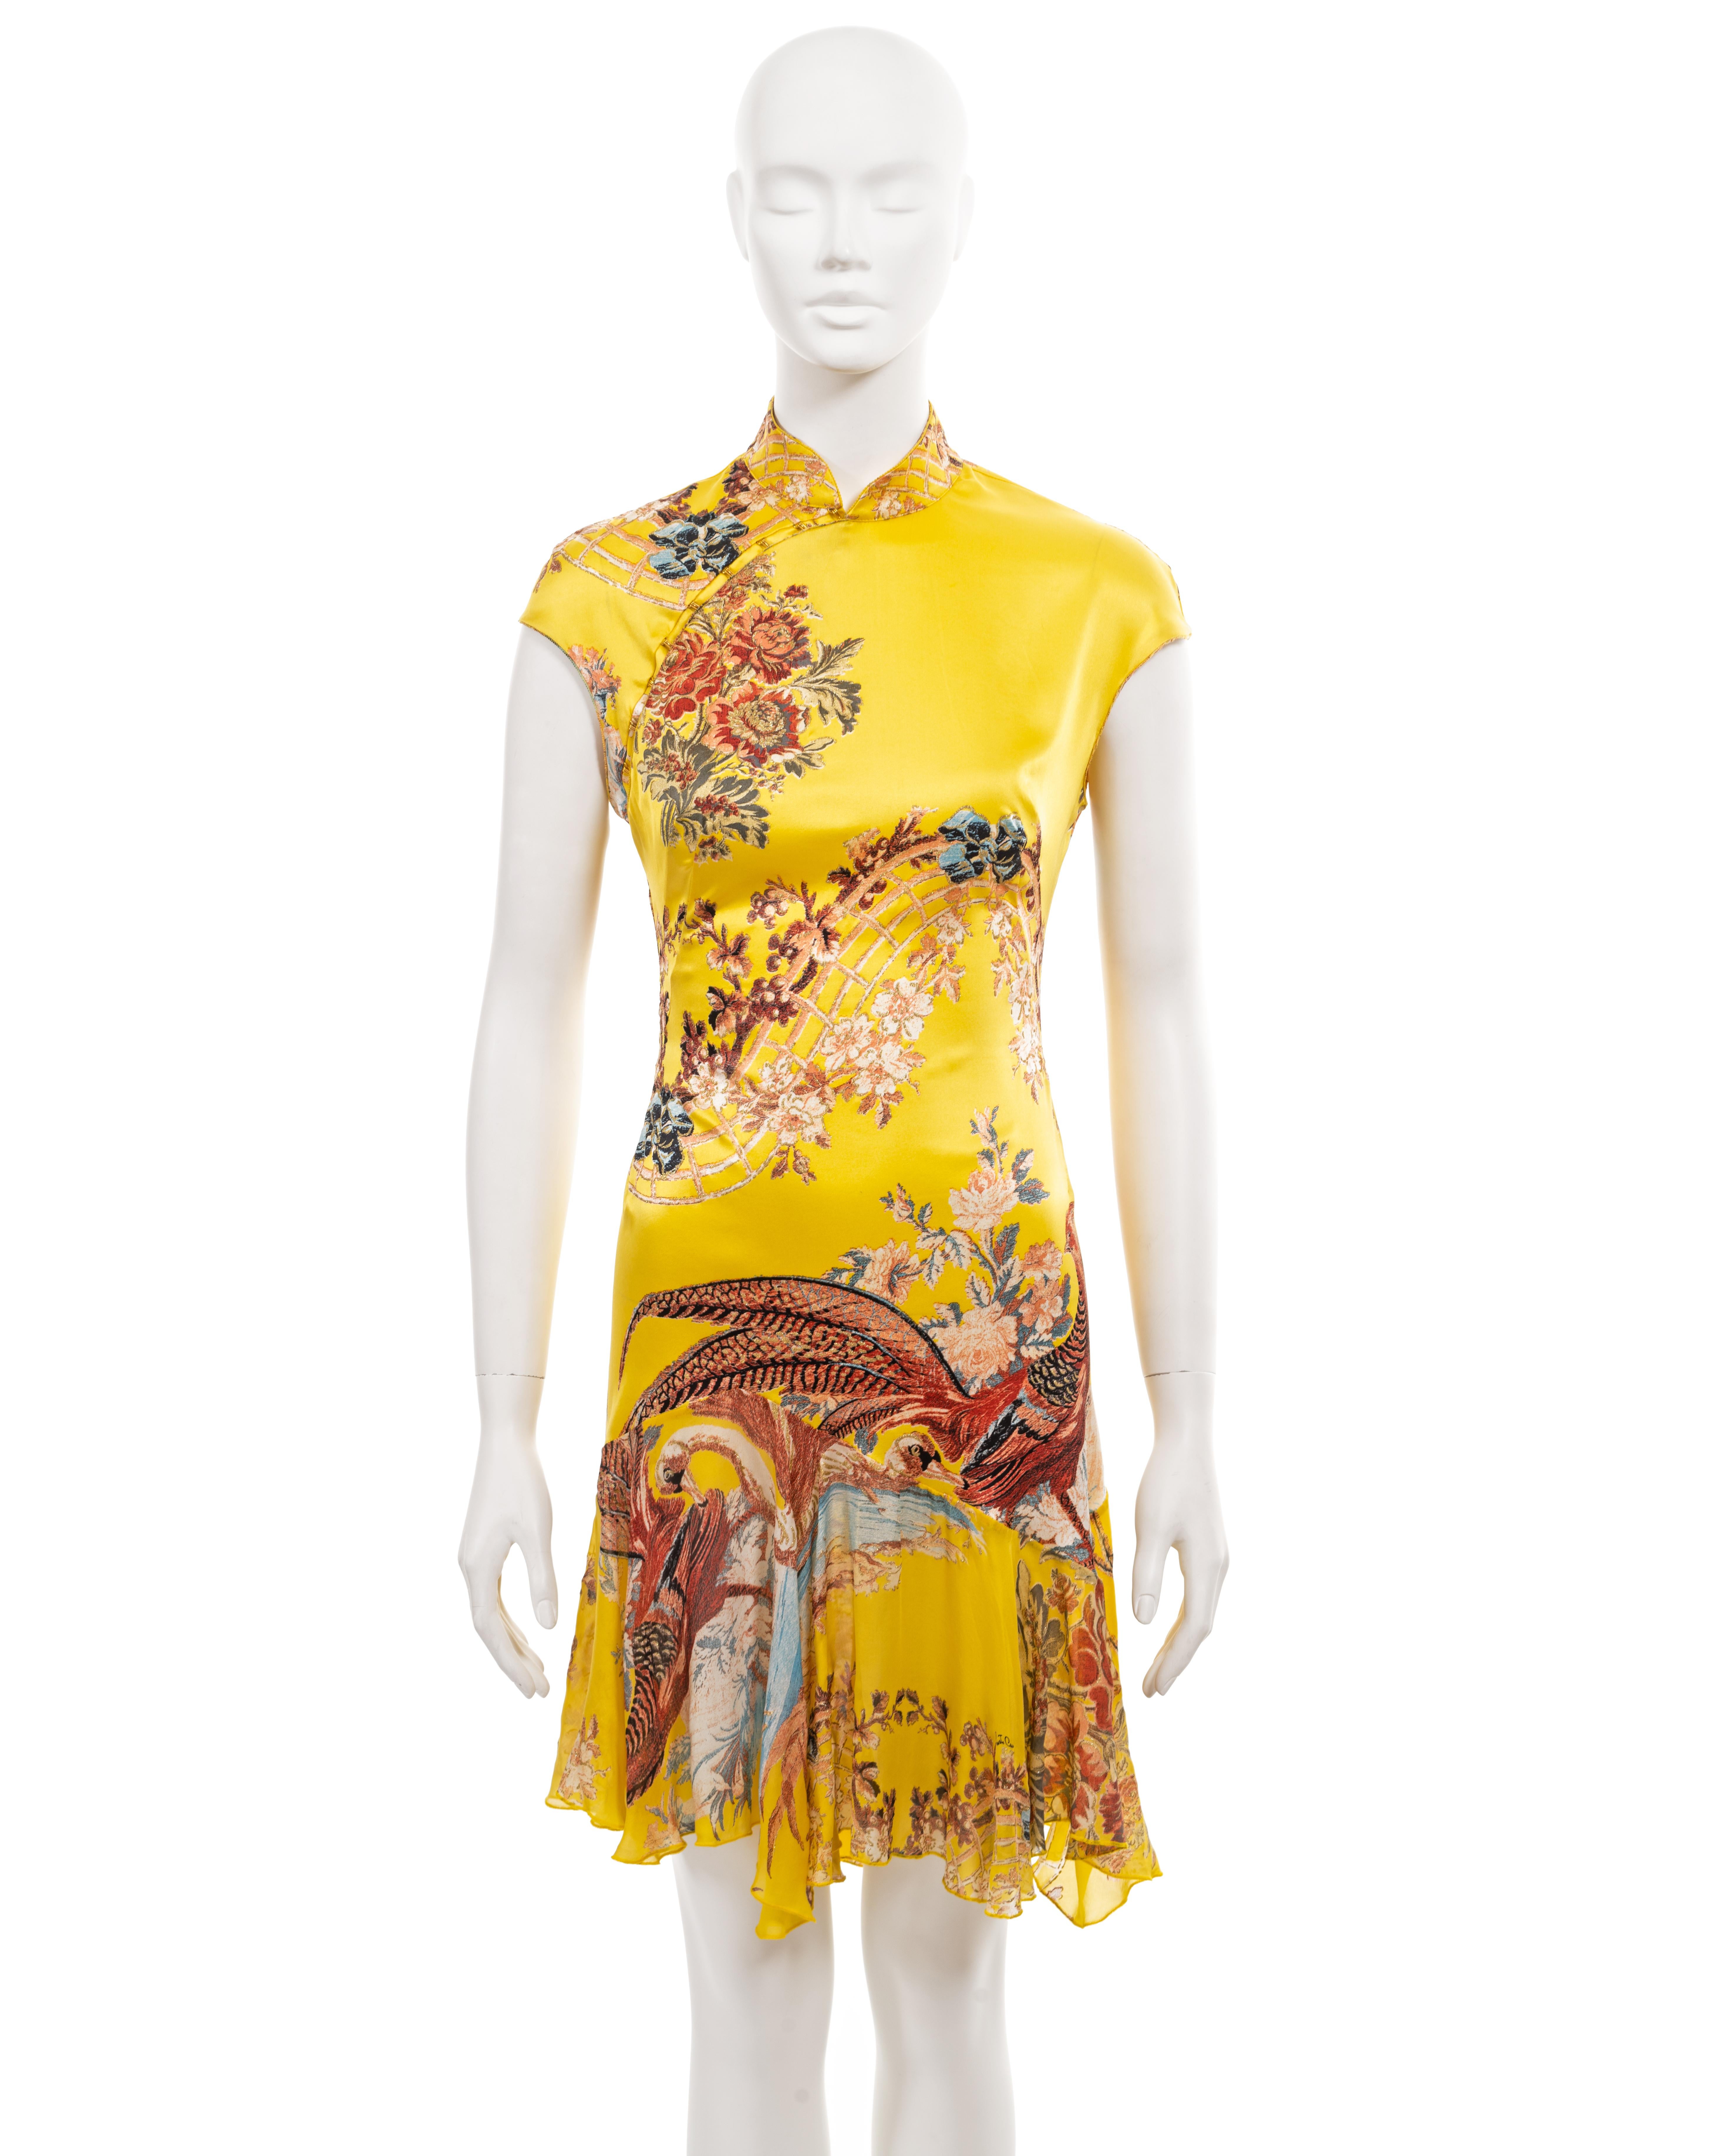 ▪ Roberto Cavalli archival dress
▪ Sold by One of a Kind Archive
▪ Yellow silk with floral and bird motifs in shades of blue and pink 
▪ Mandarin collar
▪ Cap sleeves 
▪ Cutout at the centre back  
▪ Silk chiffon mini skirt with asymmetric hemline